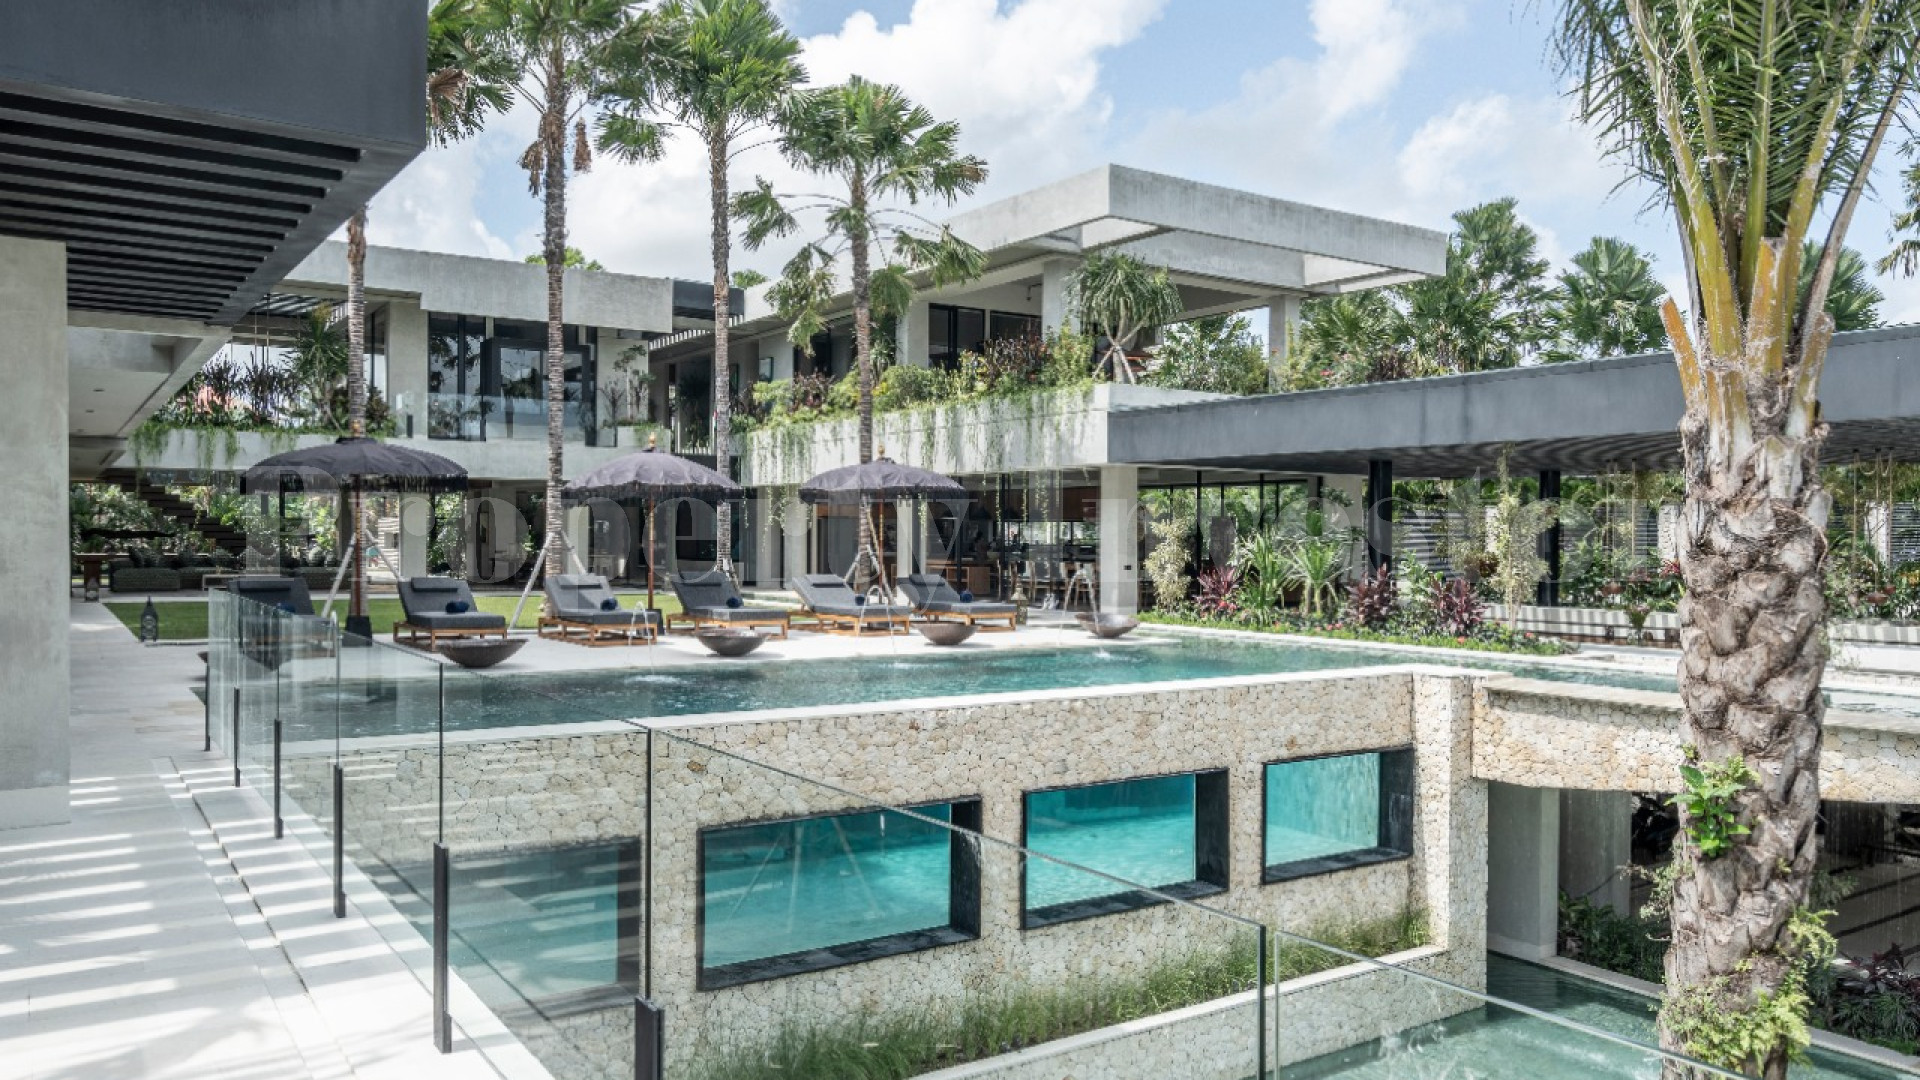 Brand-New 3-Storey Ultra Luxurious 15 Bedroom Villa with Incredible Terraces & Entertaining Spaces for Sale in Pererenan-Canggu, Bali